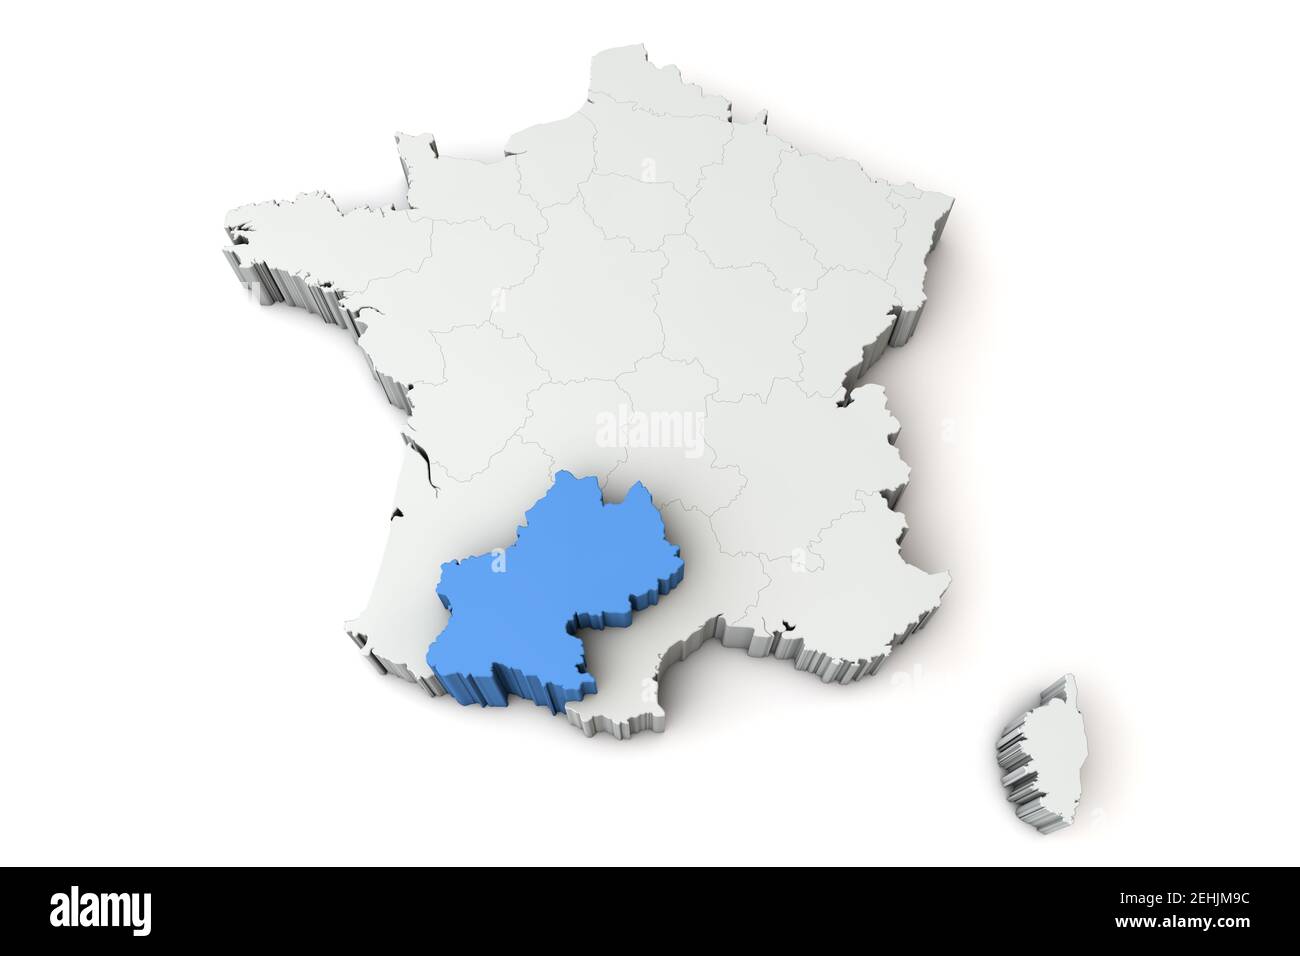 Map of France showing Midi Pyrenees region. 3D Rendering Stock Photo